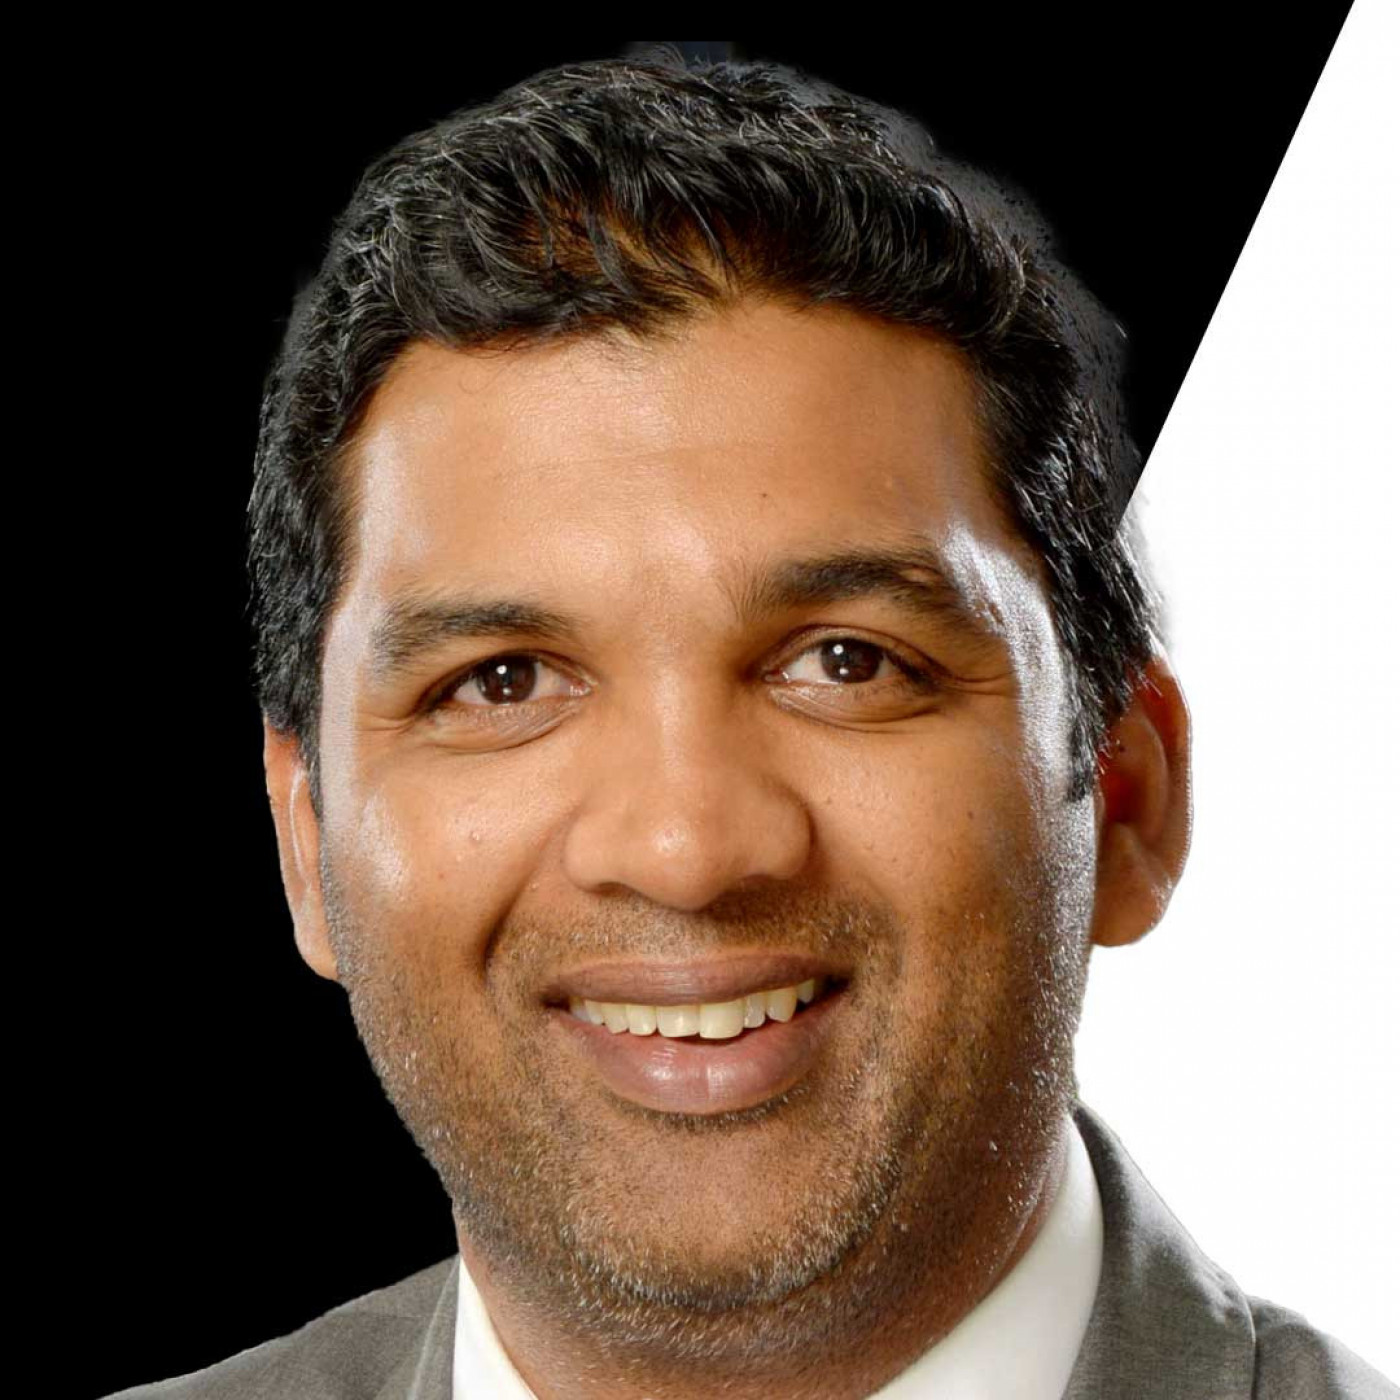 TCS | Altron’s Collin Govender on South Africa’s challenge of leadership